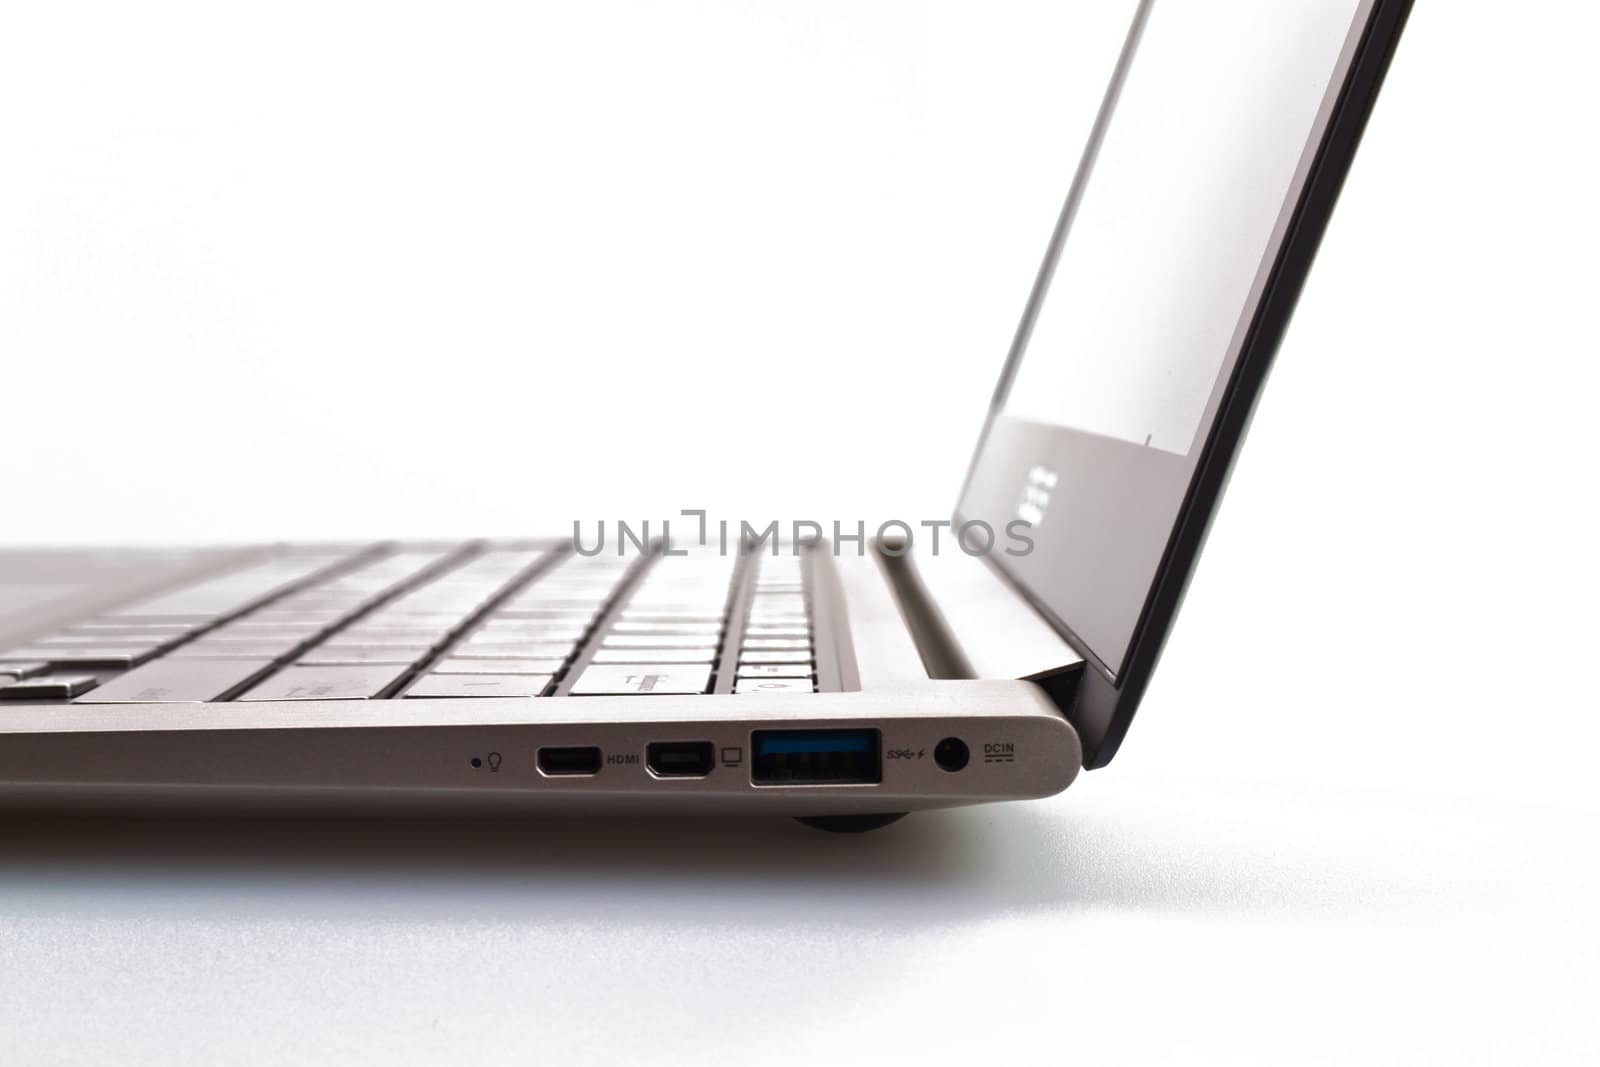 a modern metal laptop with opened lid on white background for abstract background